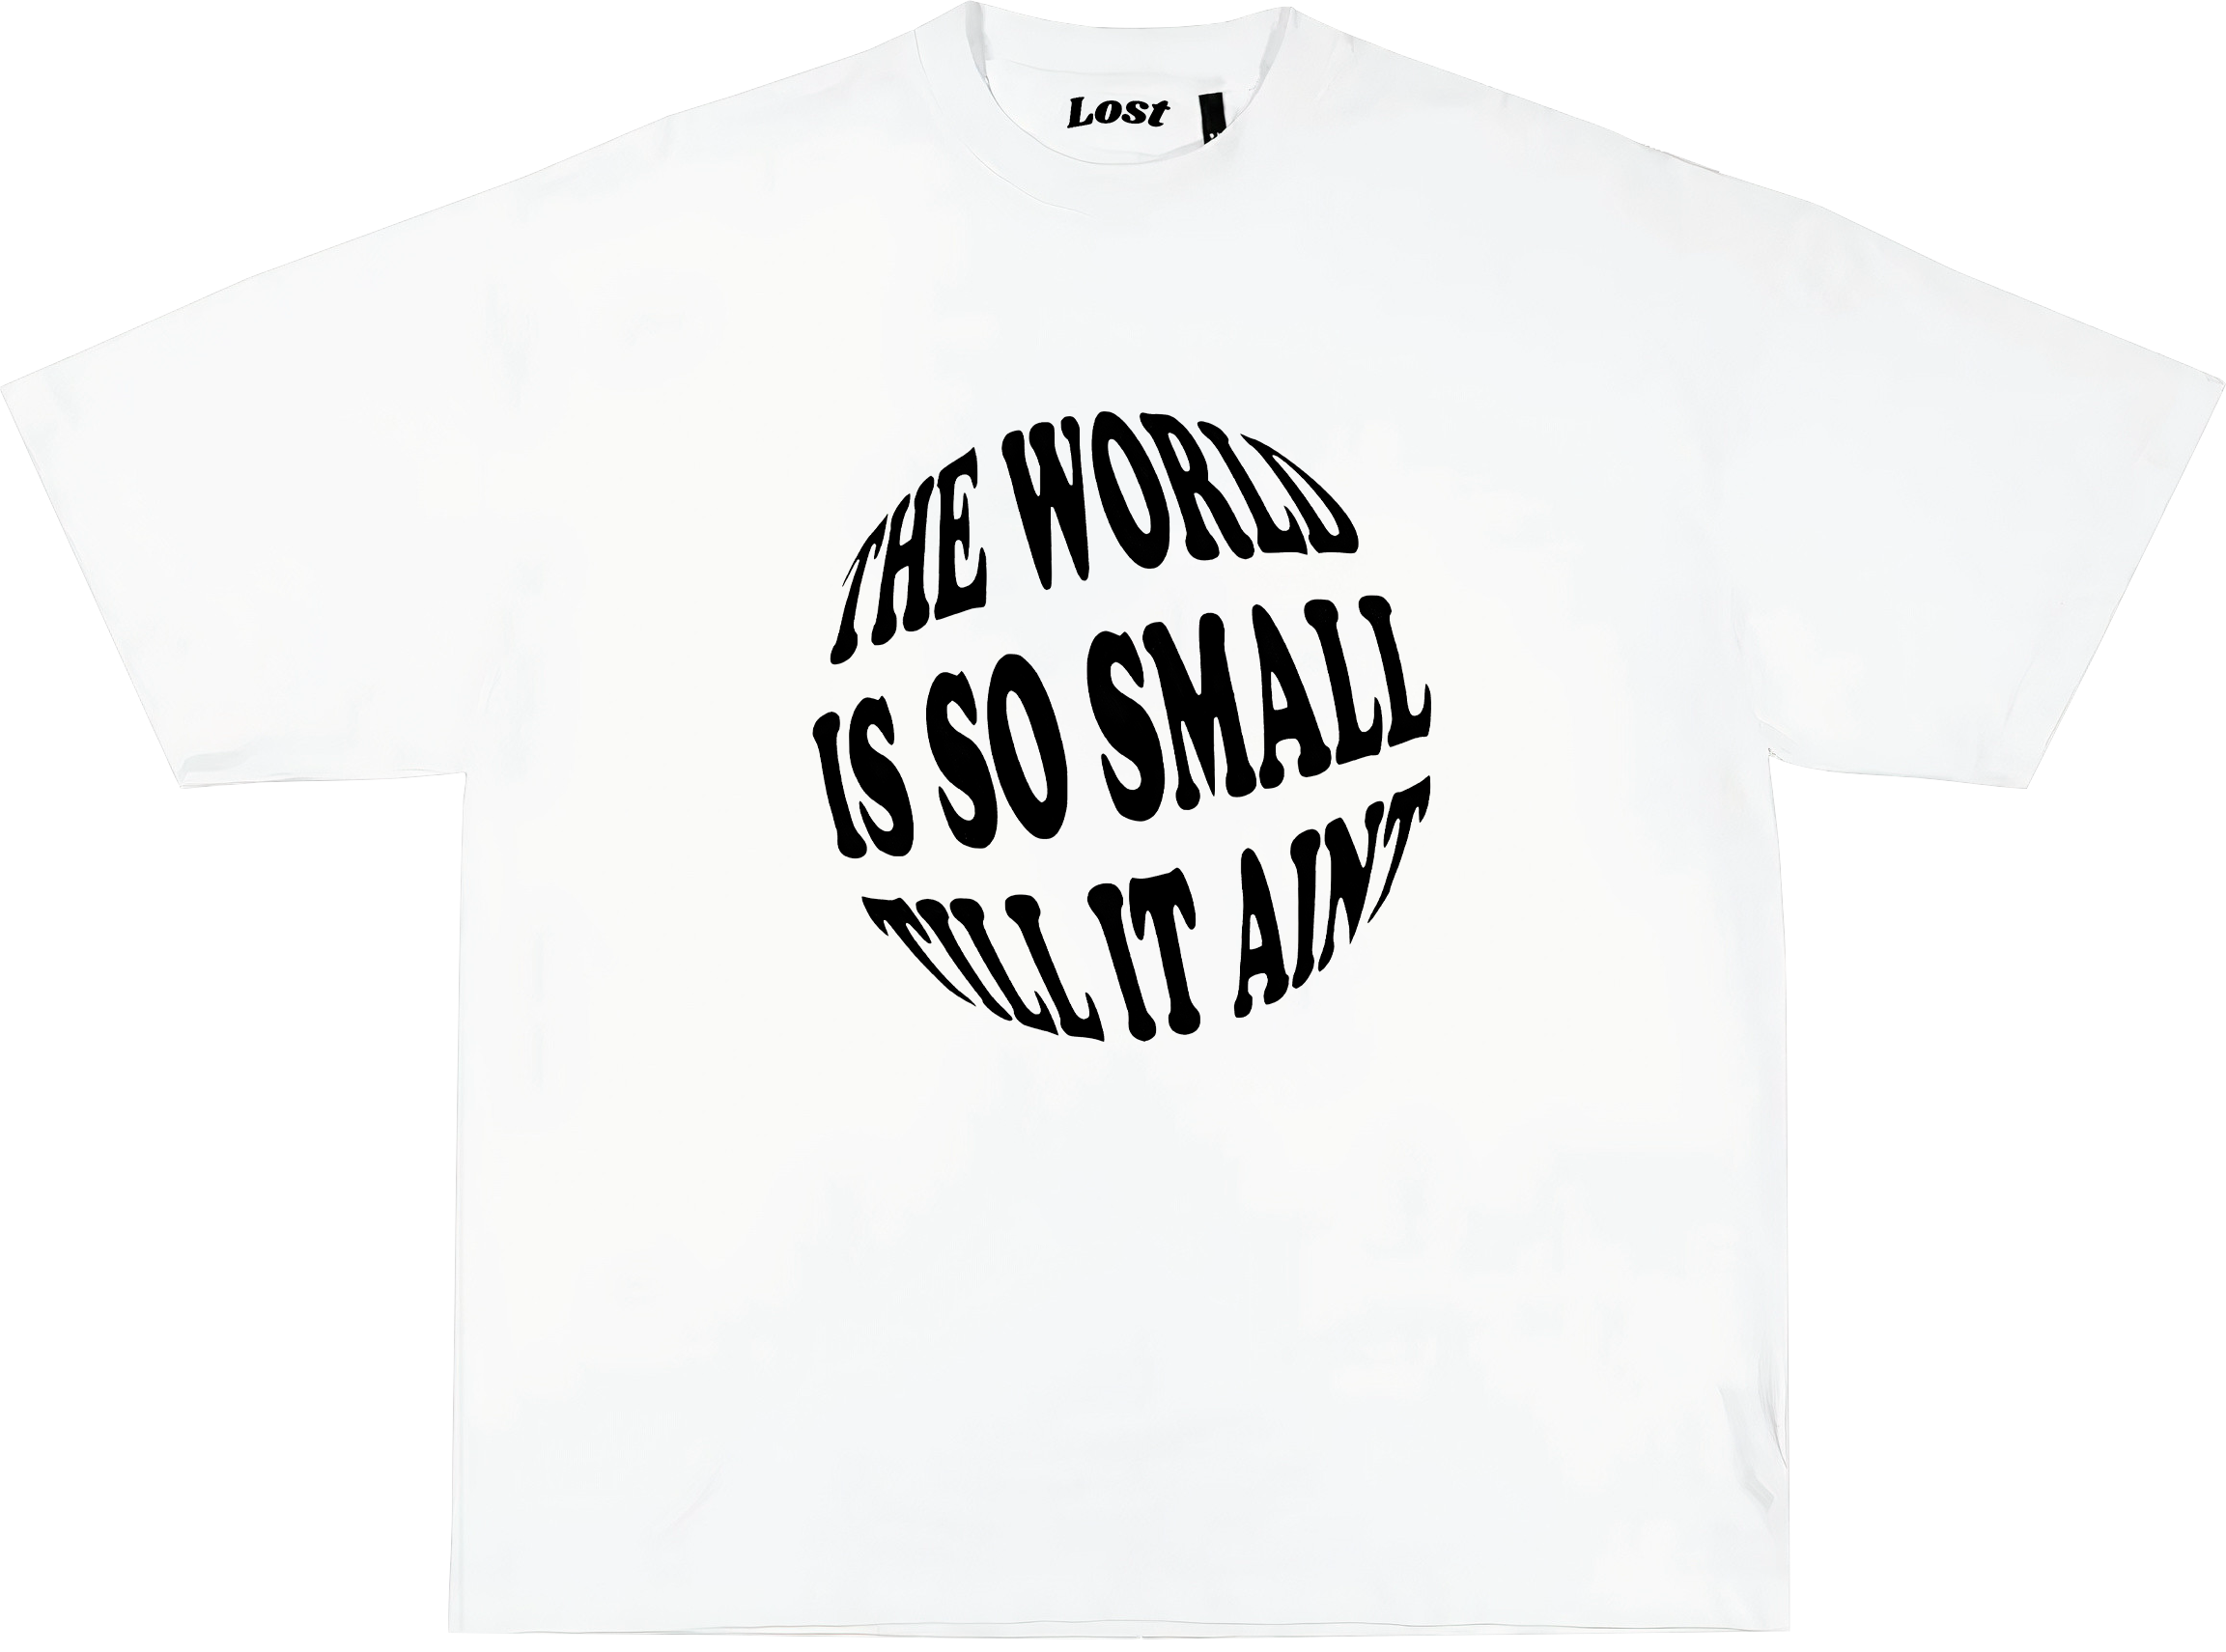 MAC MILLER "world is too small" Oversized T-shirt